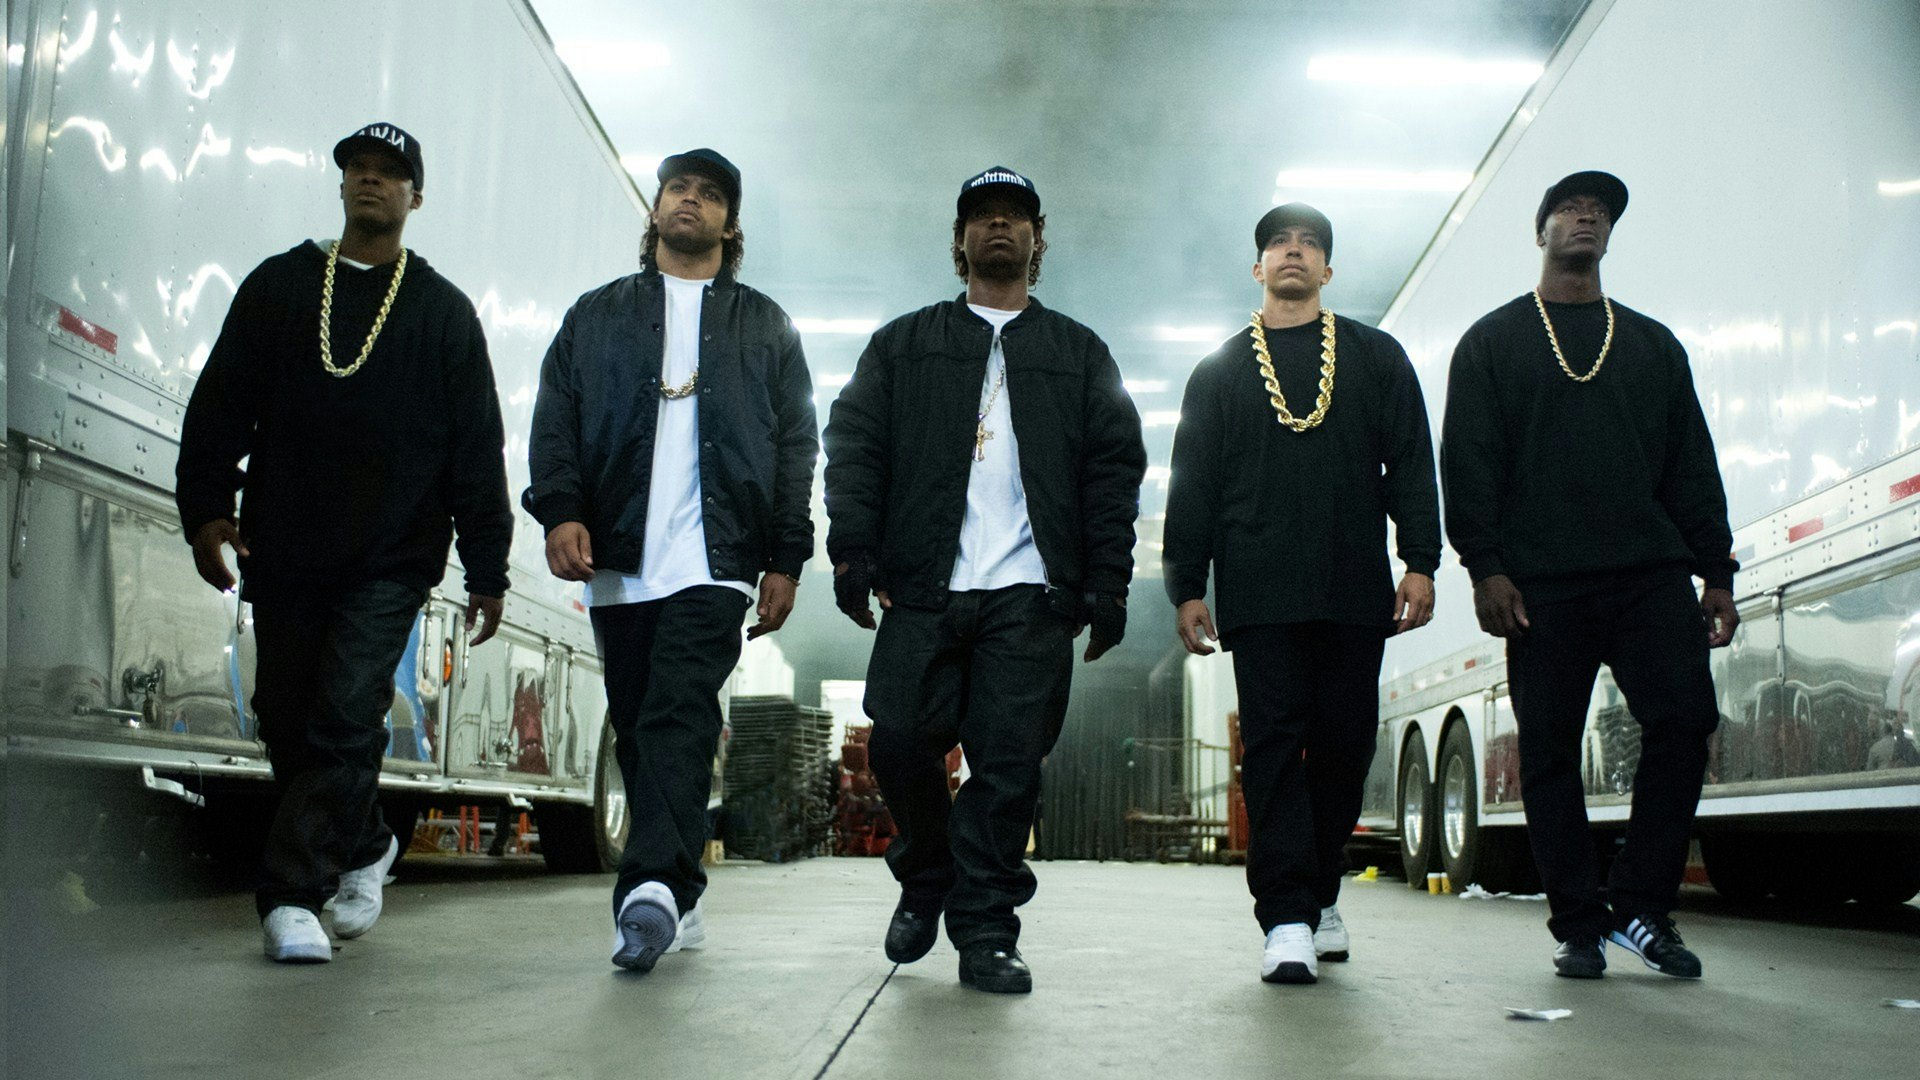 straight outta compton songs